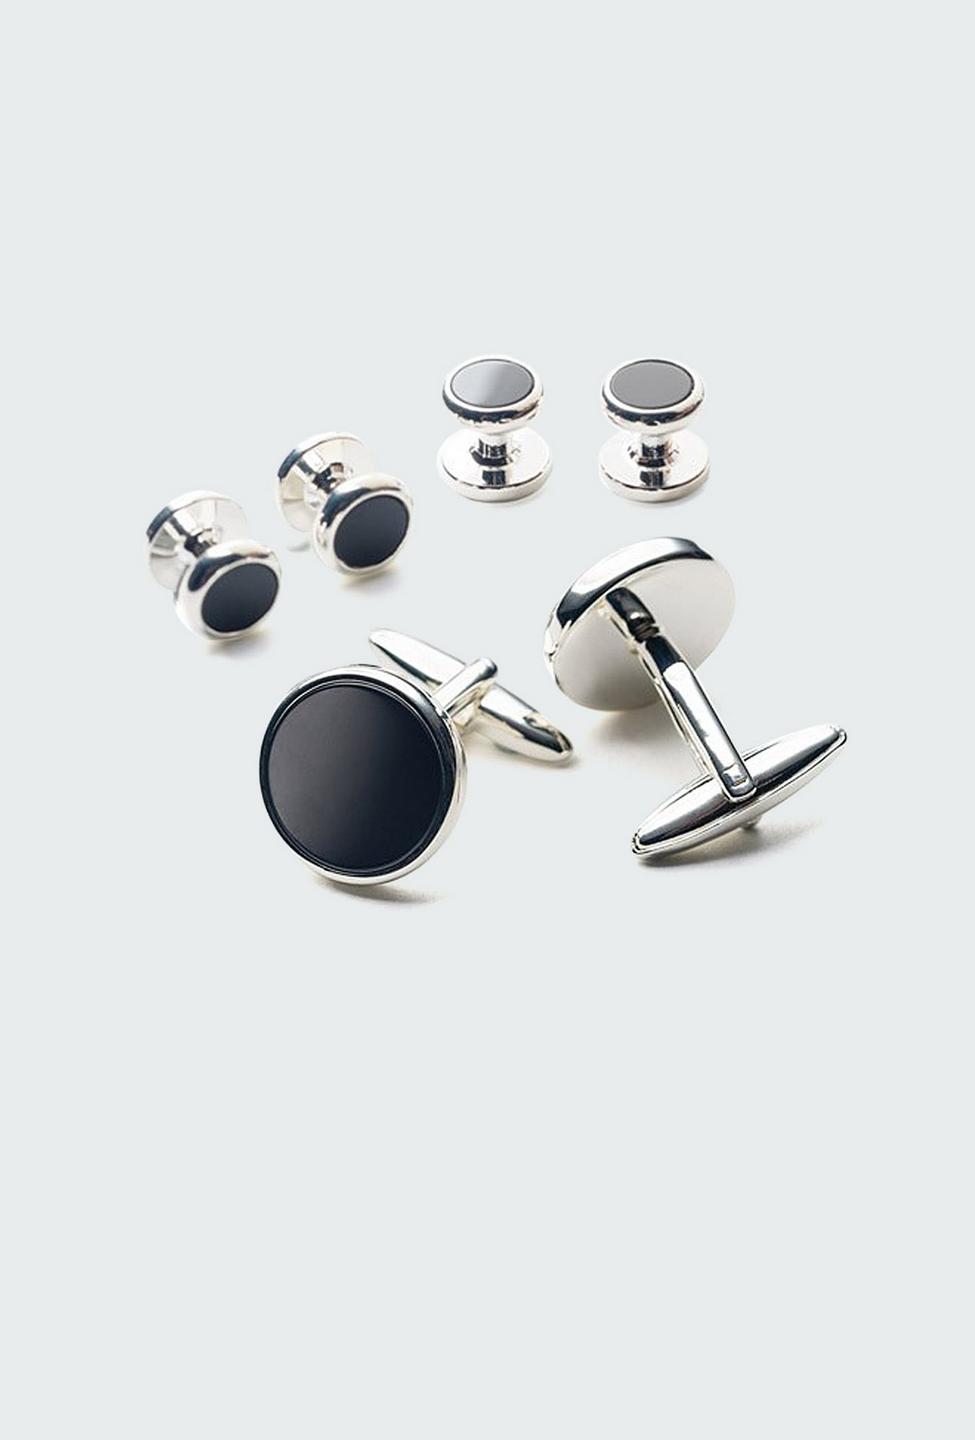 Black and Silver cuff links - Solid Design from Premium Indochino Collection